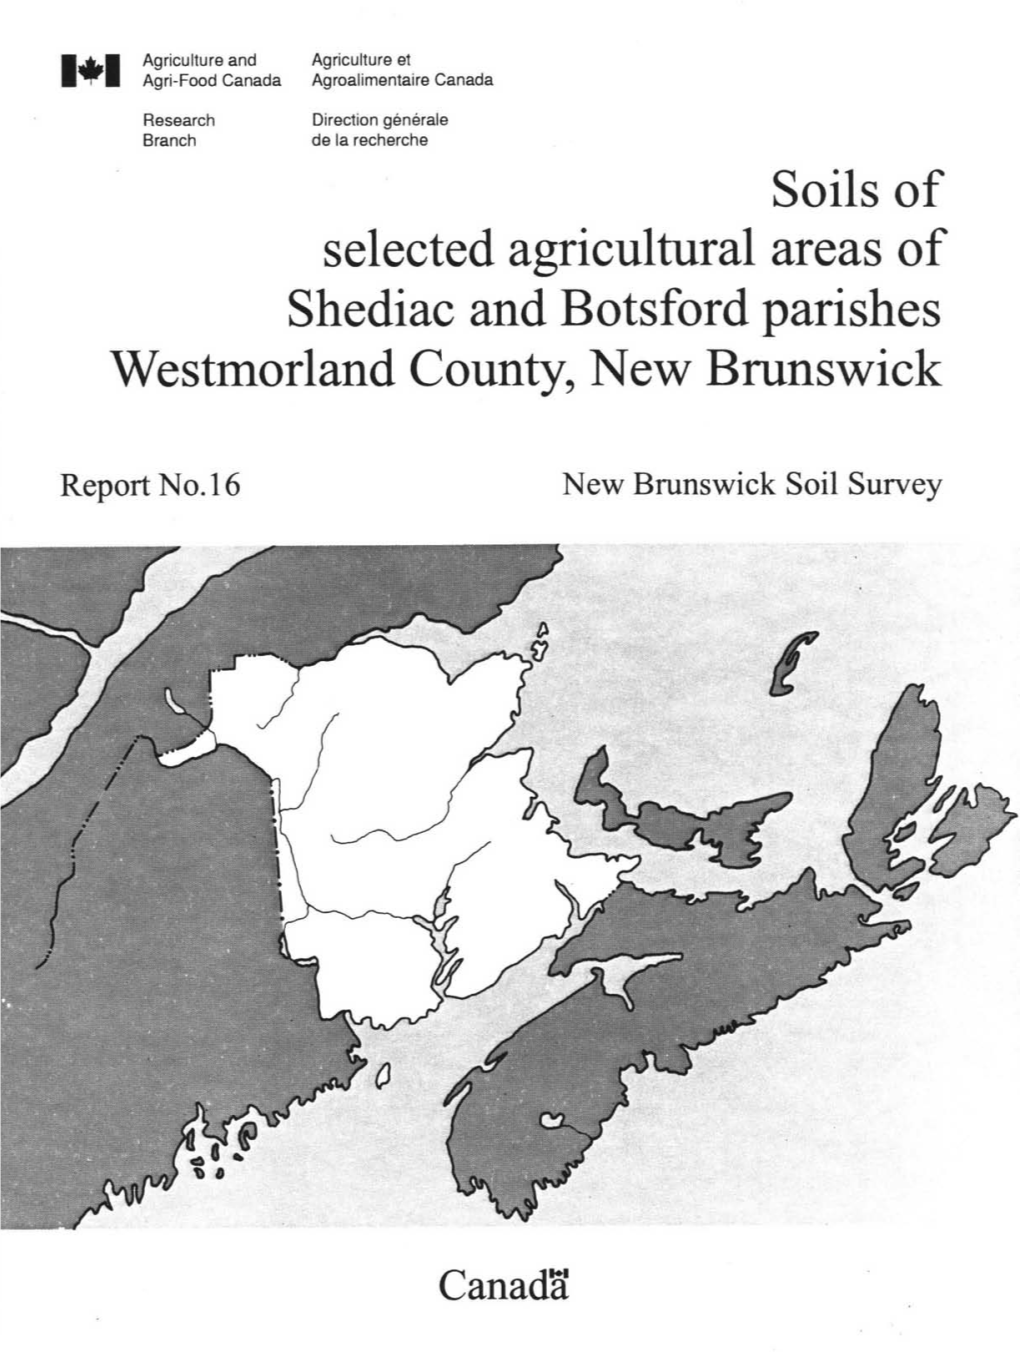 Soils of Selected Agricultural Areas of Shediac and Botsford Parishes Westmorland County, New Brunswick